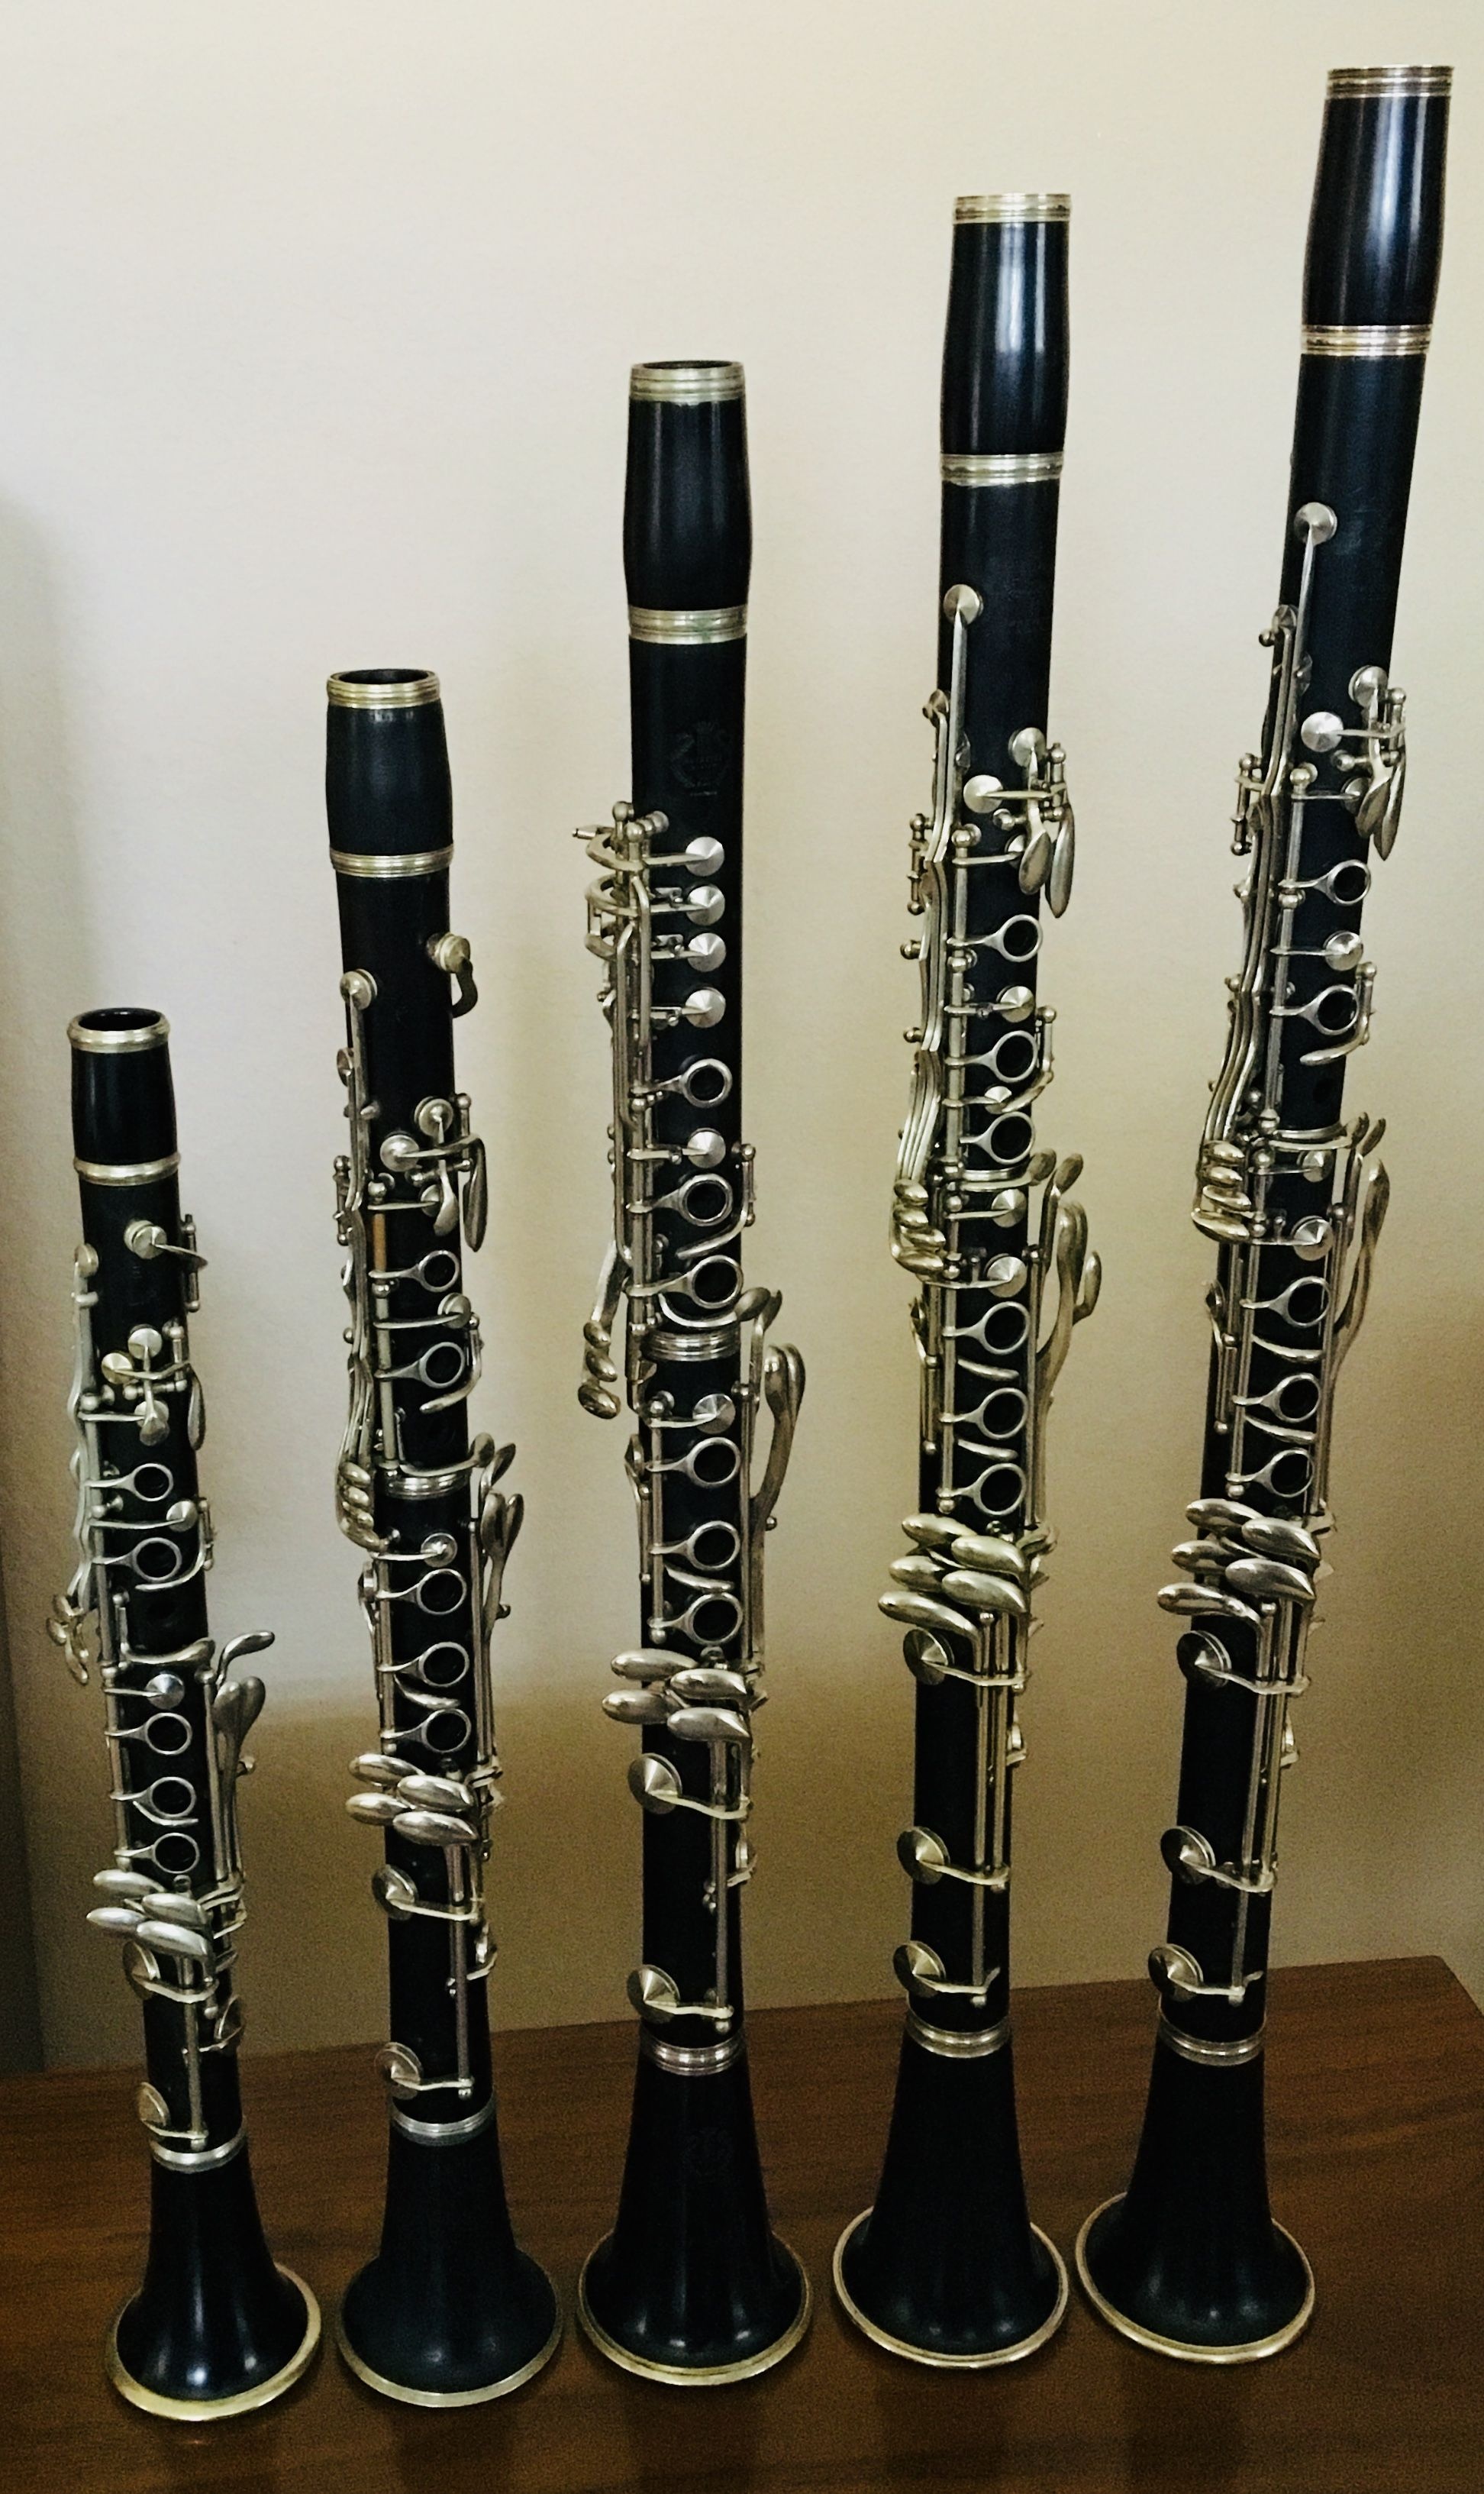 Clarinet: Woodwind instruments, A family of many differently pitched clarinet types. 1950x3270 HD Wallpaper.